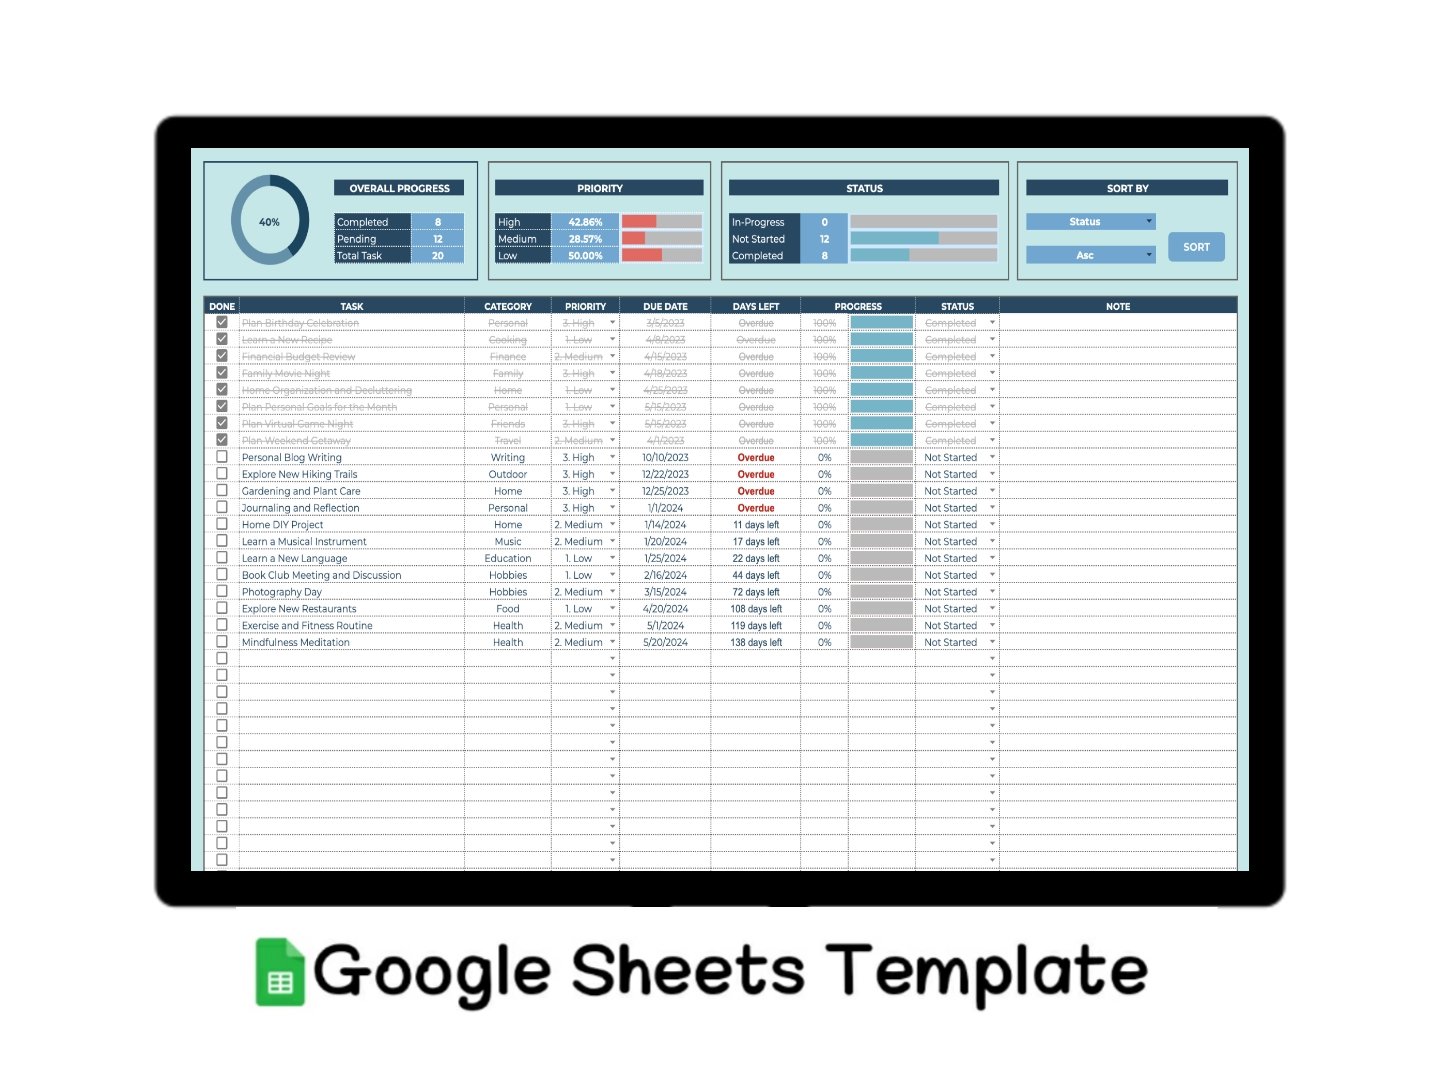 To-do list Google Sheets Template